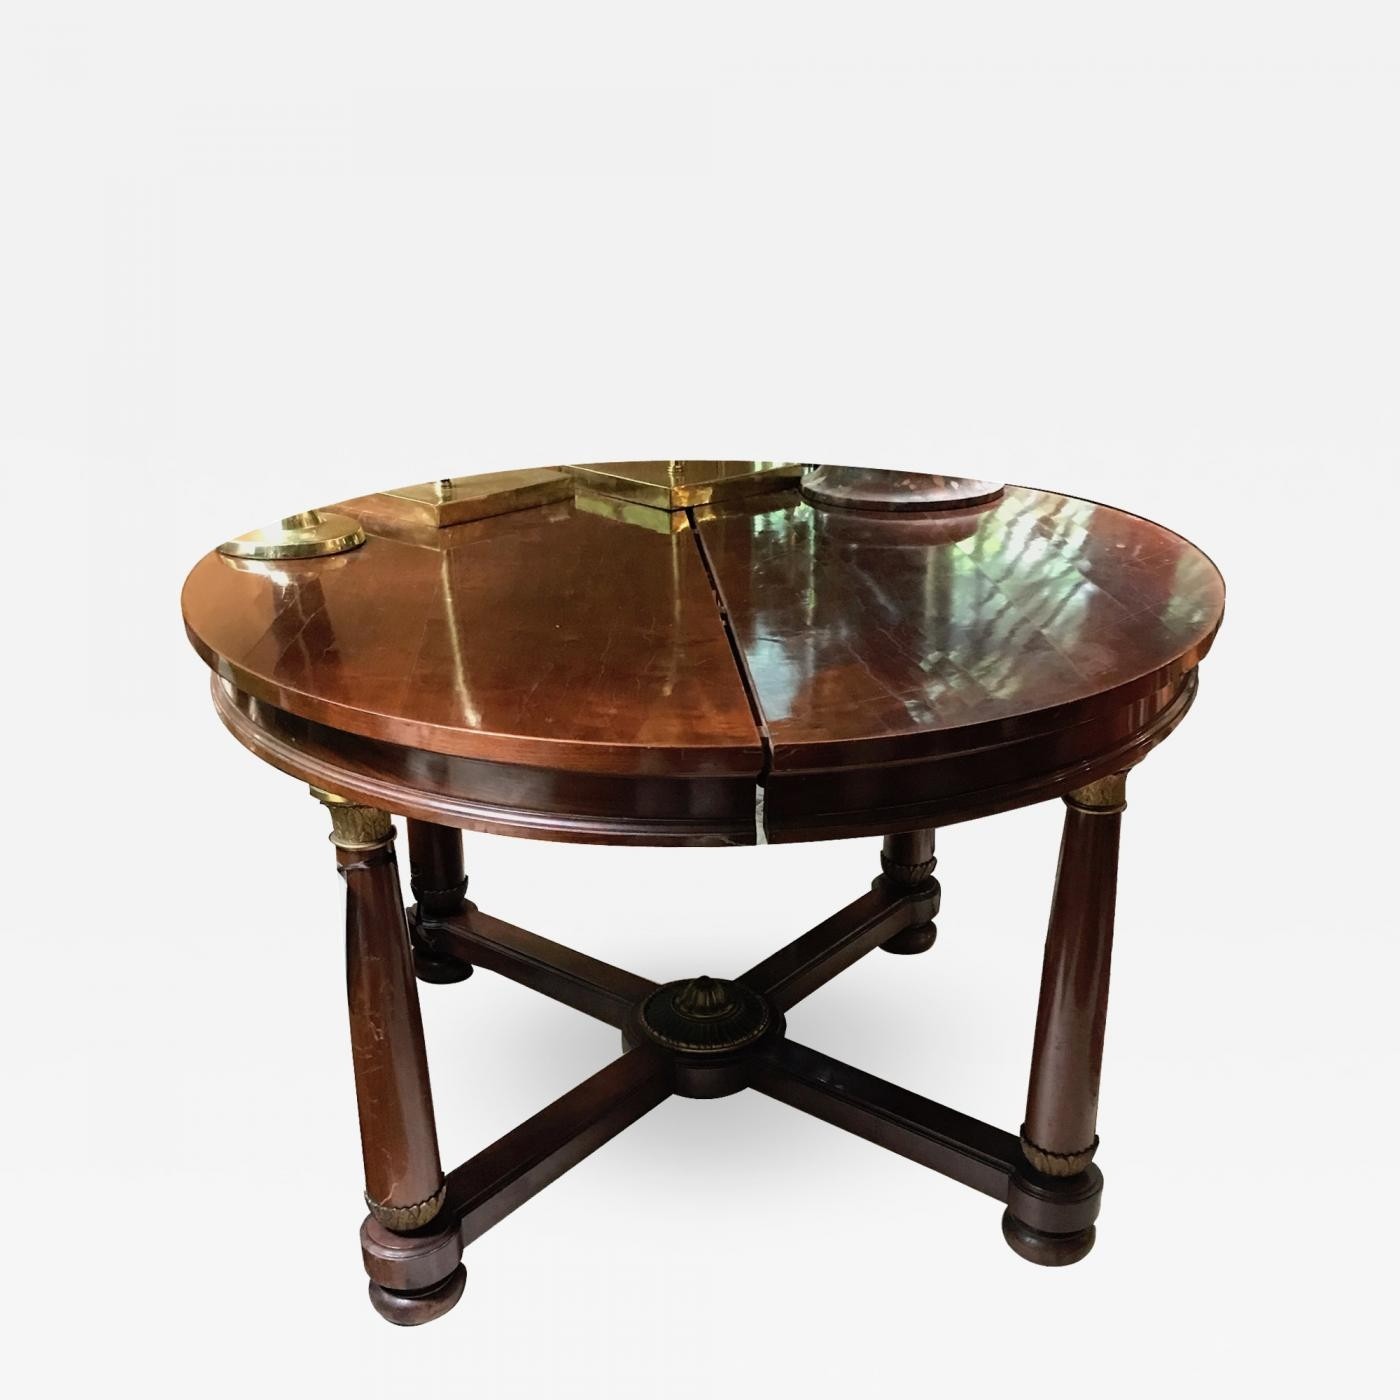 Empire dining style table with bronze details